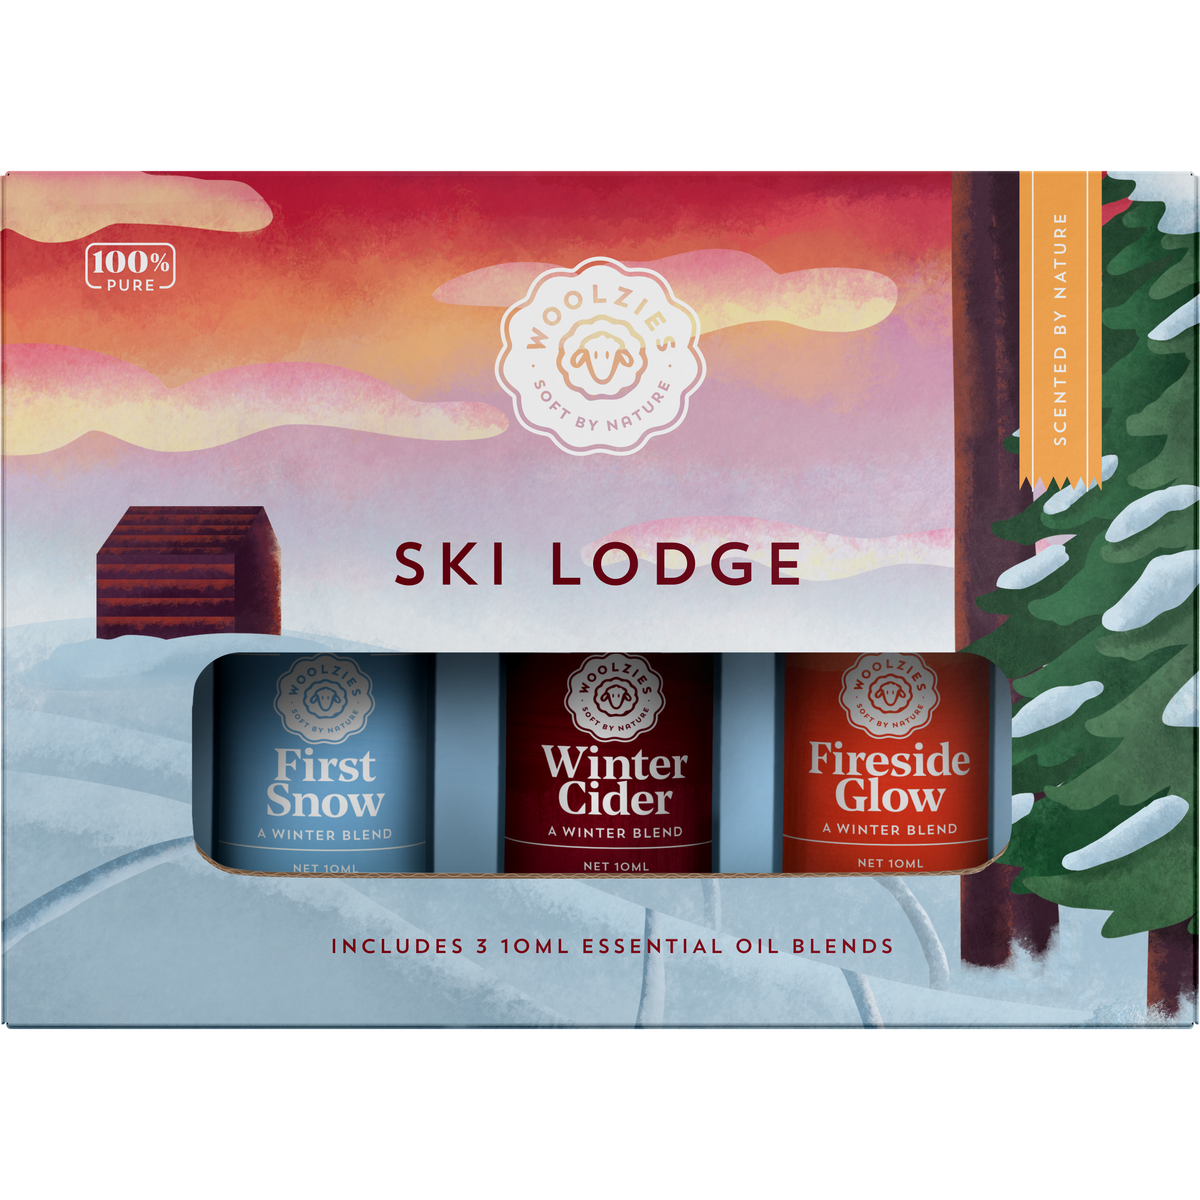 A Woolzies The Ski Lodge Collection package with three winter essential oils blends named first snow, winter glow, and fireside glow against a colorful snowy backdrop with a cabin and trees.